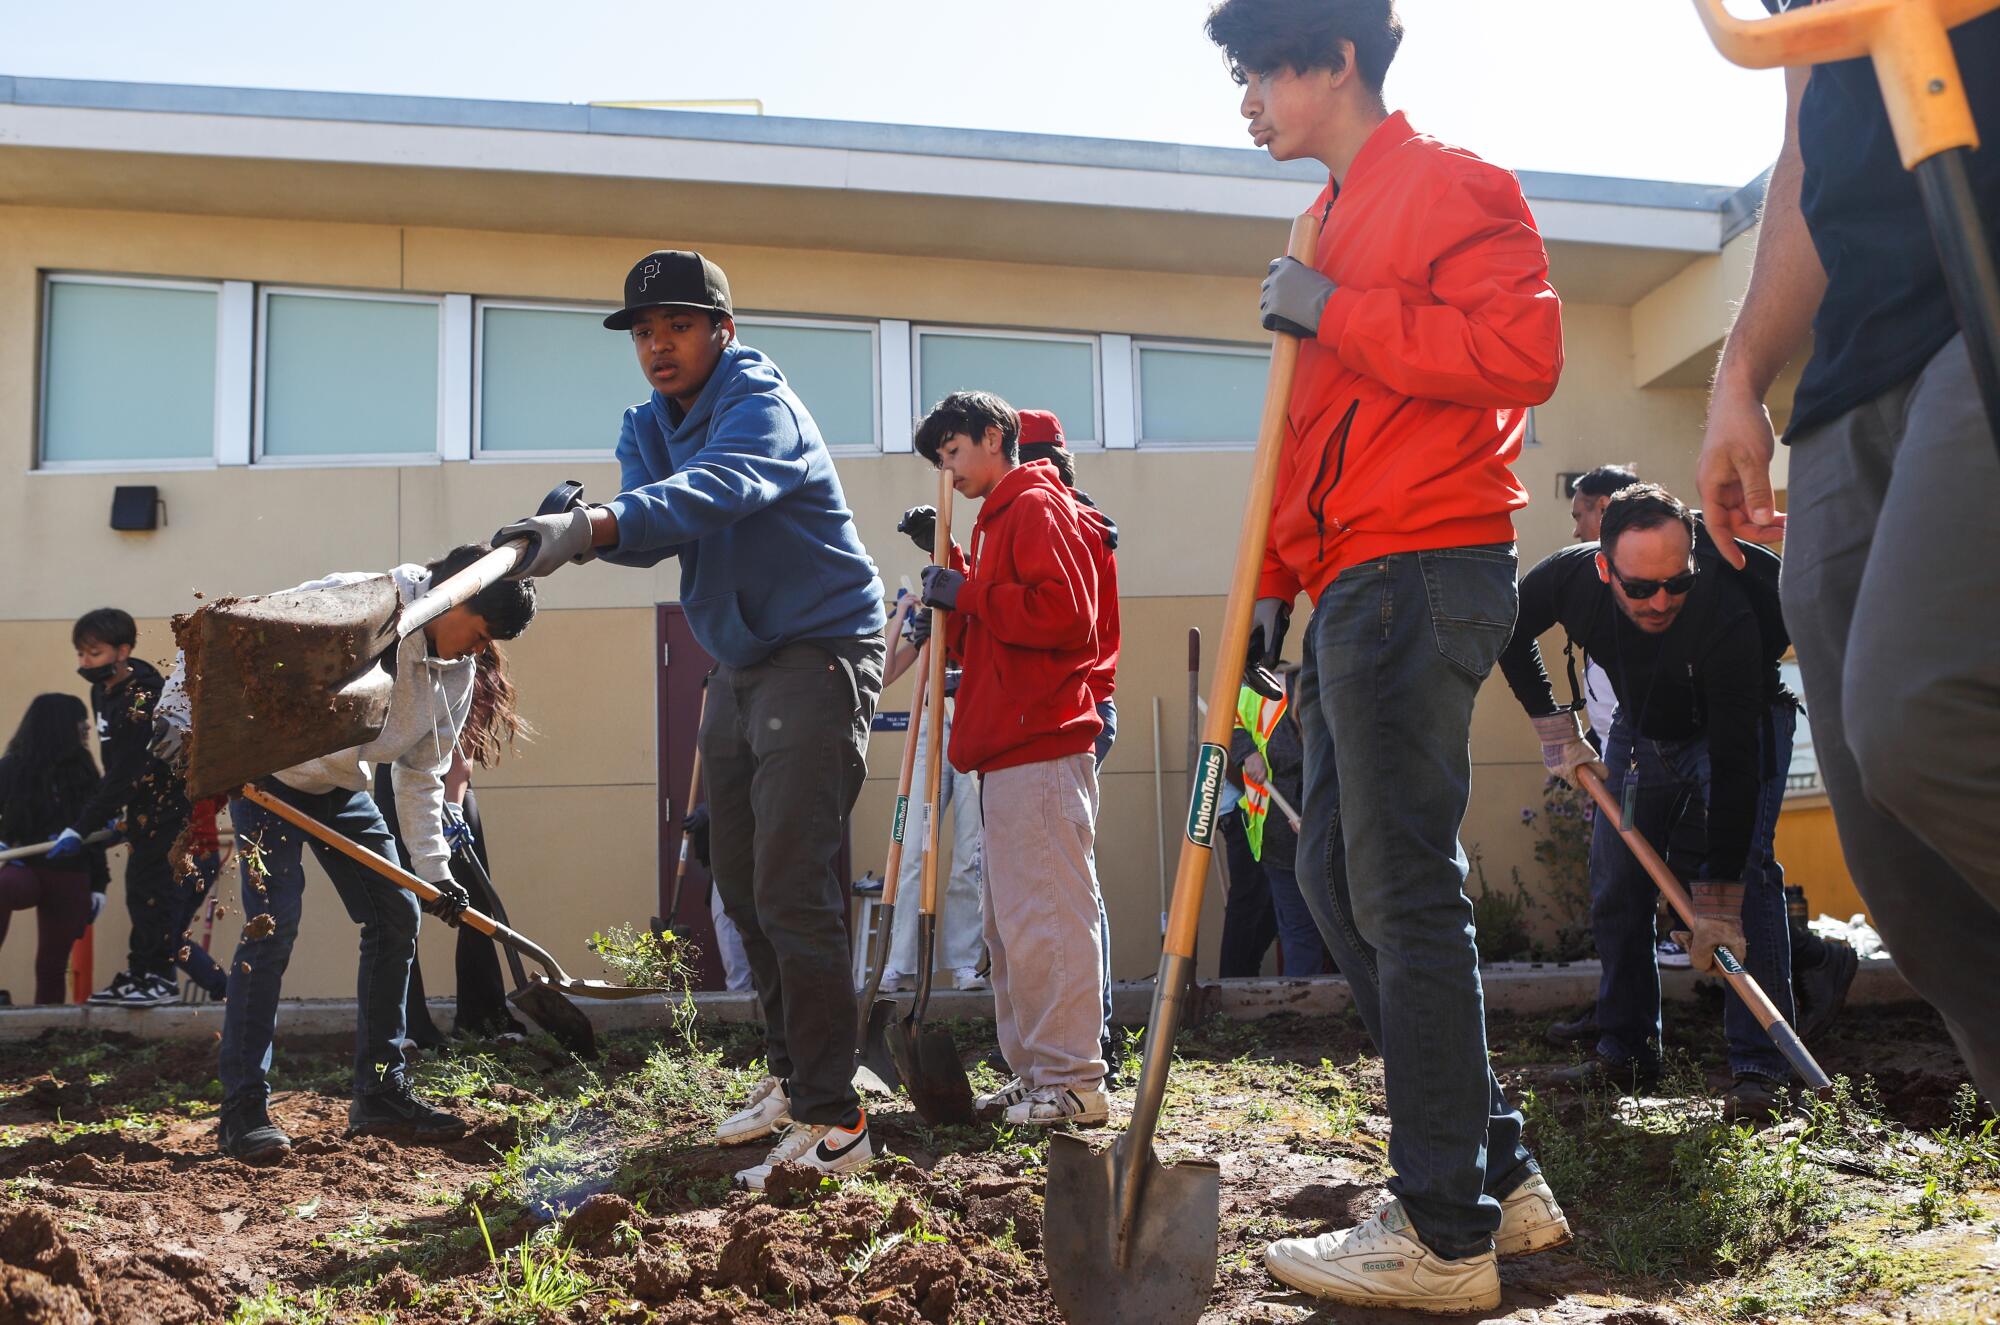 Students dig in a garden.